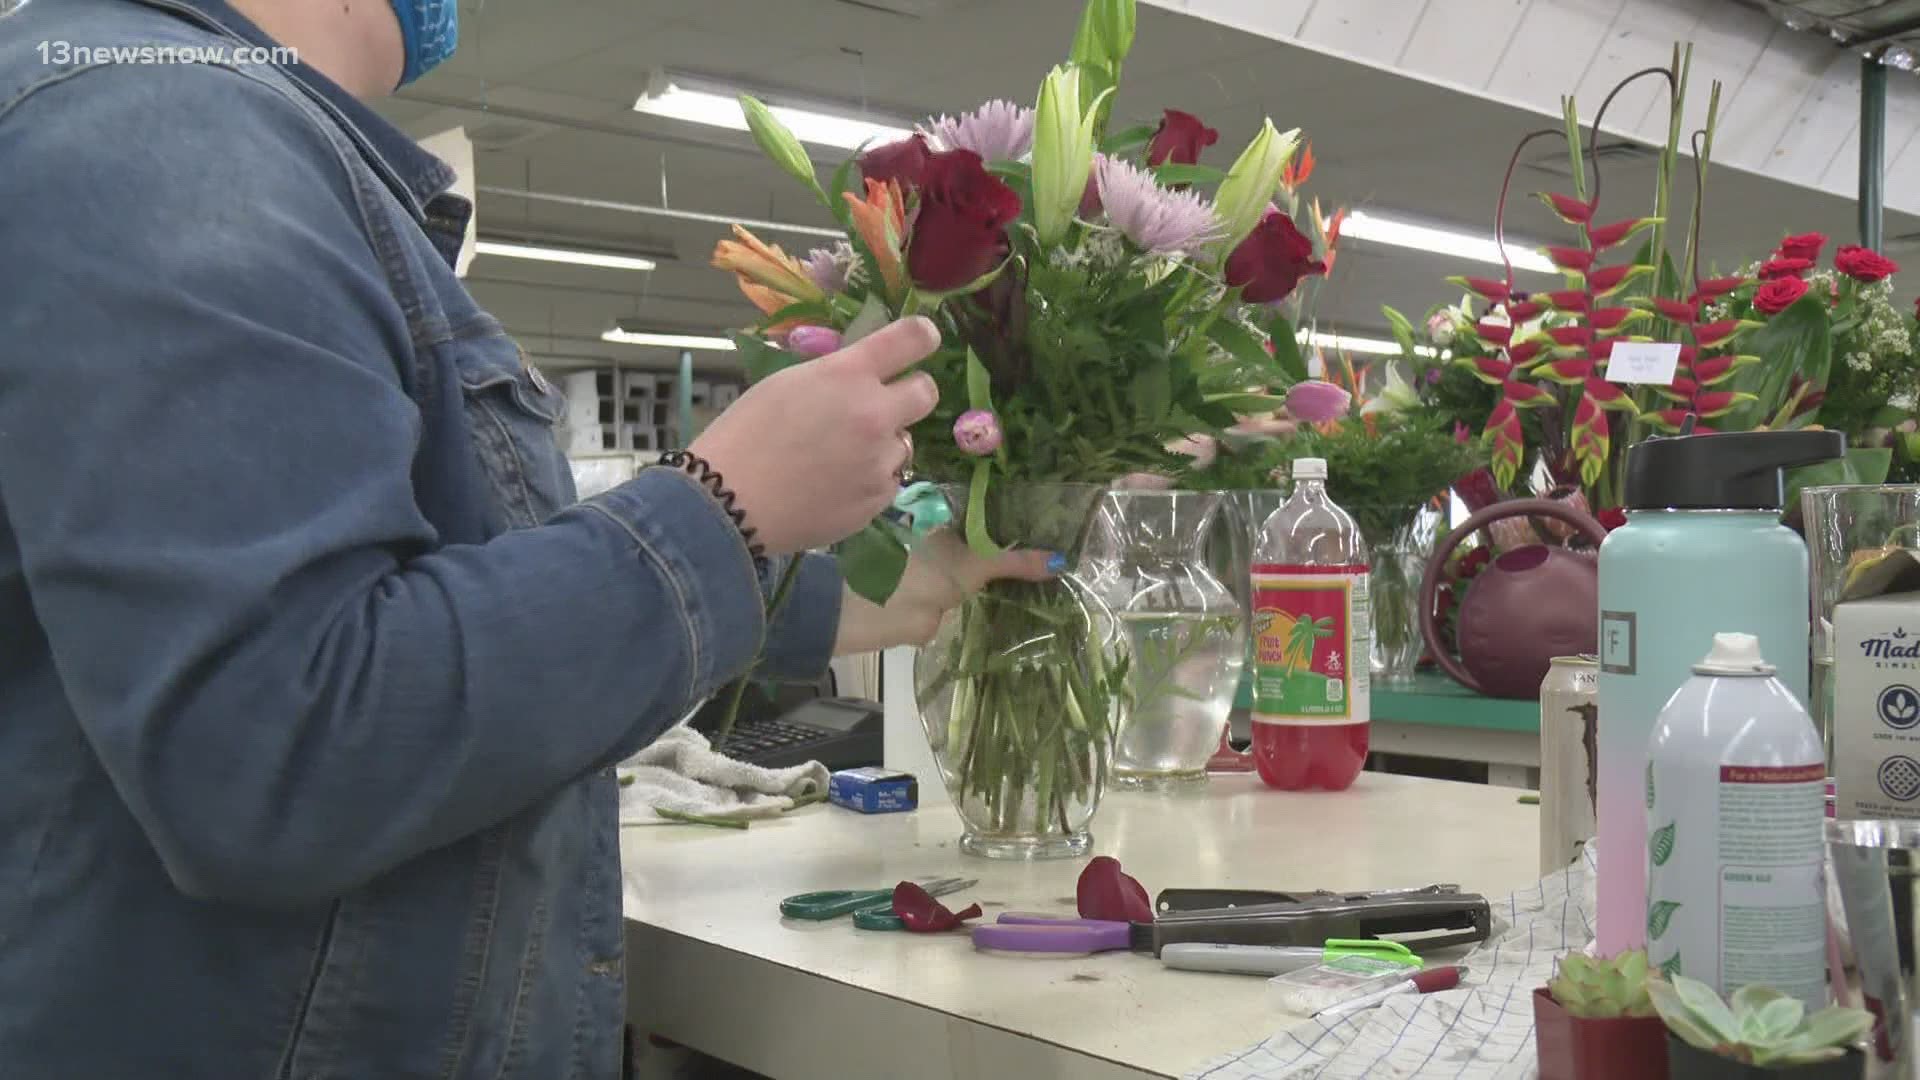 Mother's Day is one of the busiest days of the year for florists! But this year, shops are experiencing a flower shortage.